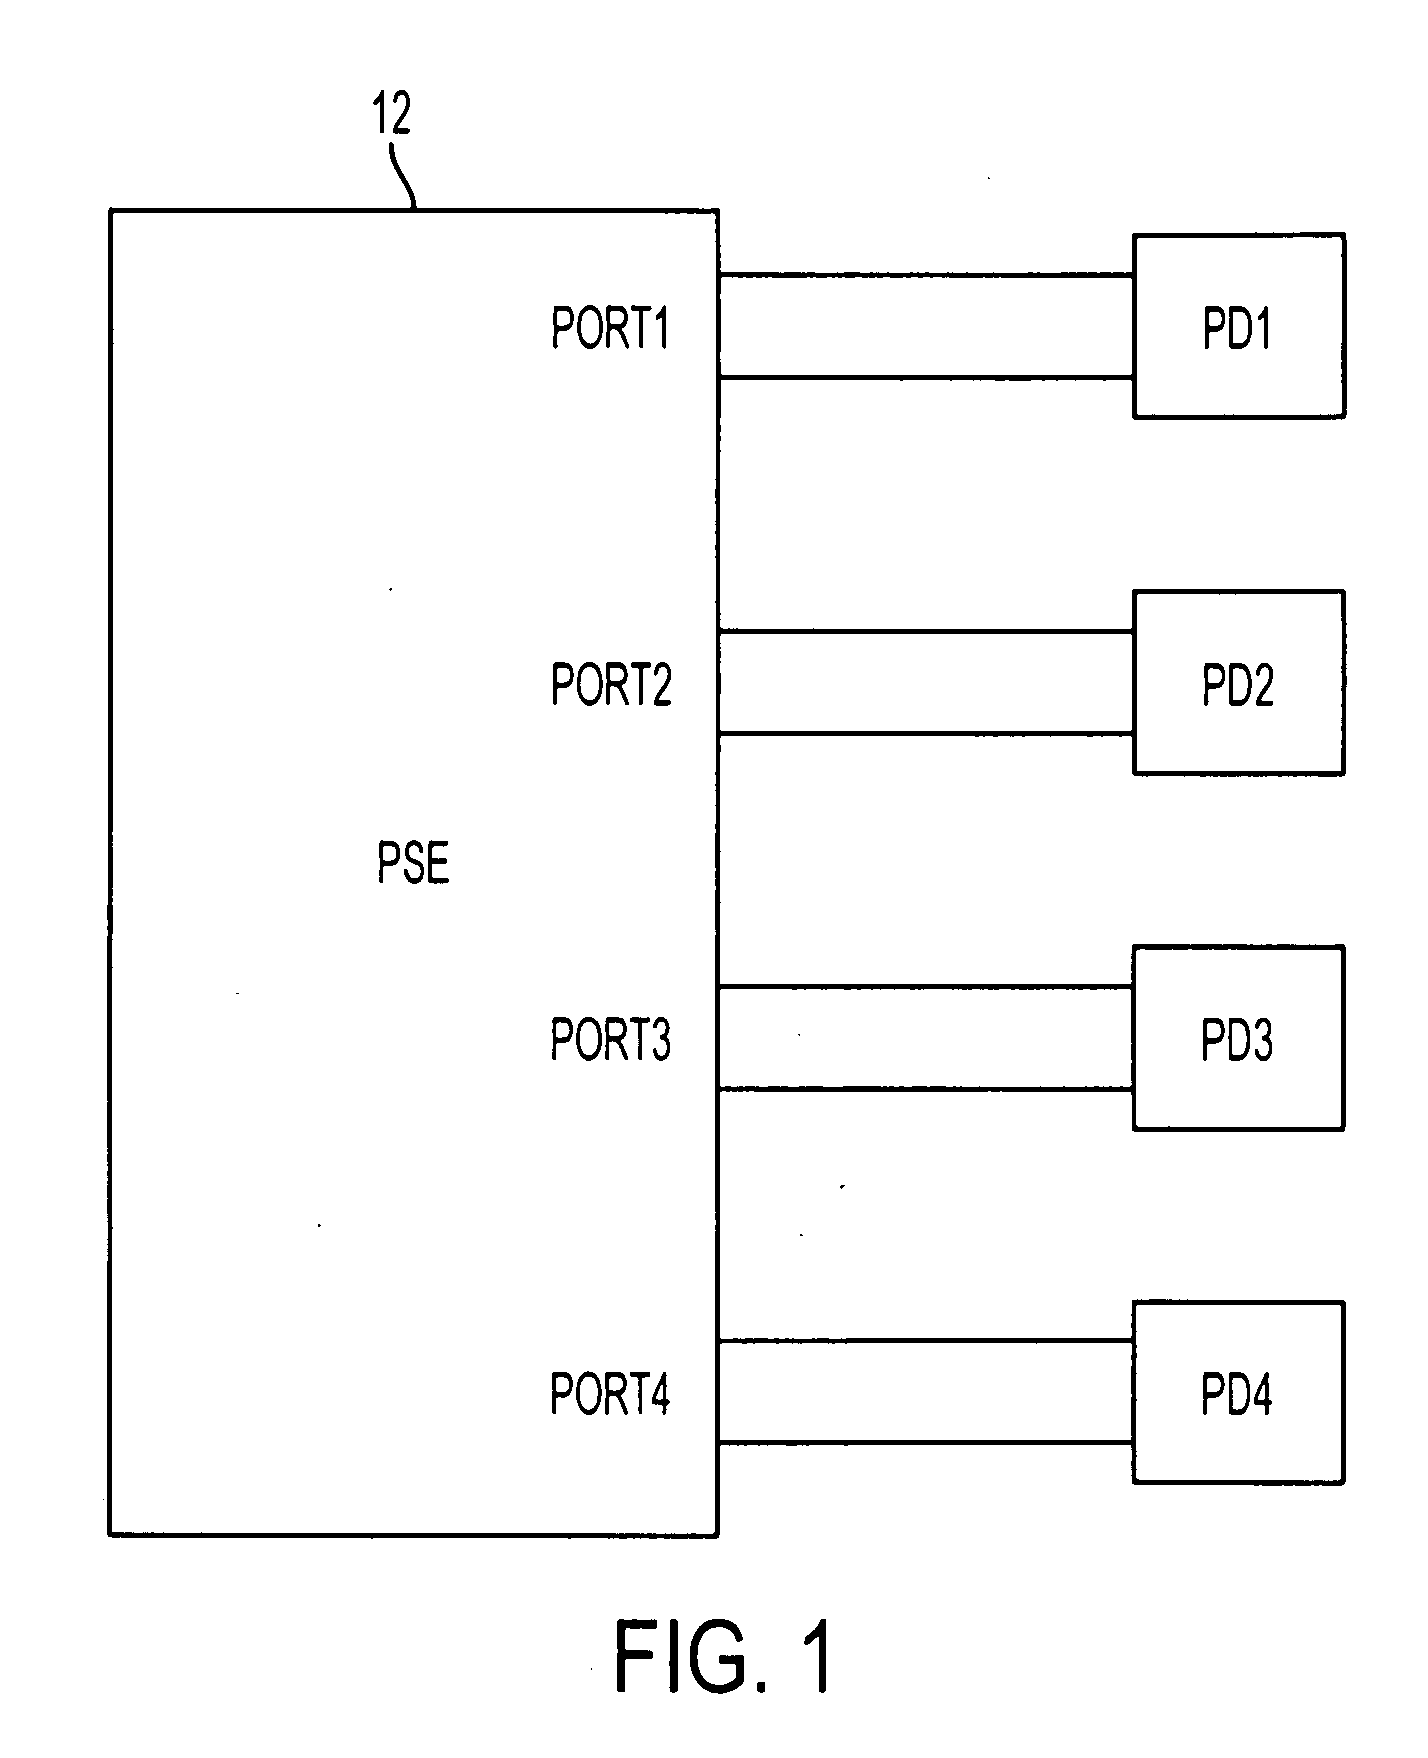 Providing detailed information on powered device in system for supplying power over communication link